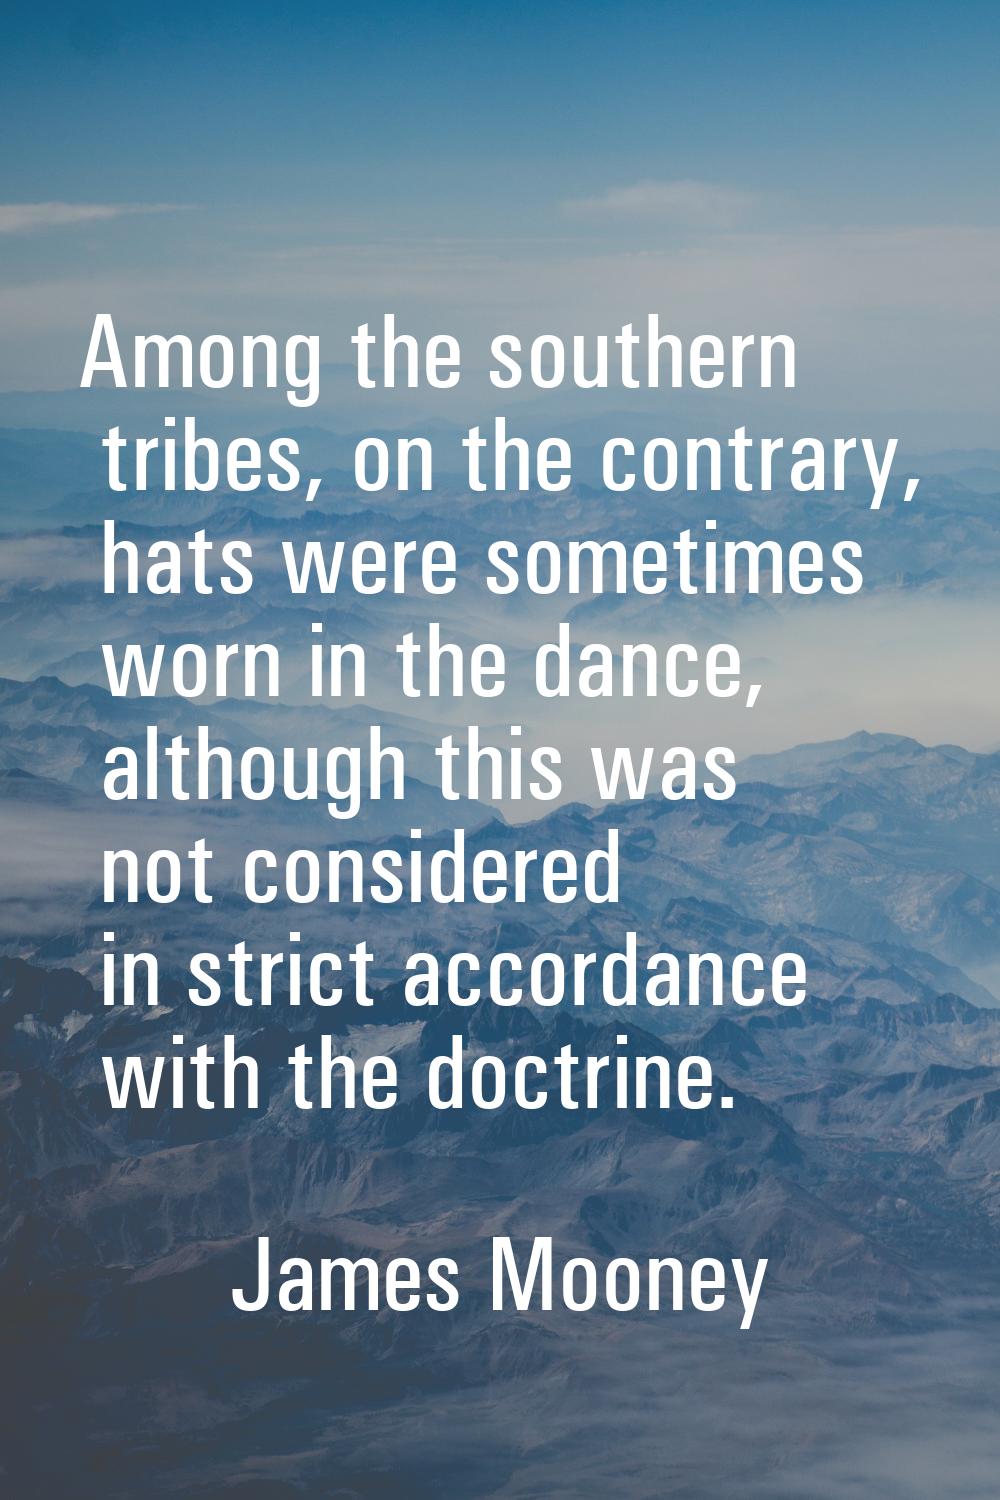 Among the southern tribes, on the contrary, hats were sometimes worn in the dance, although this wa